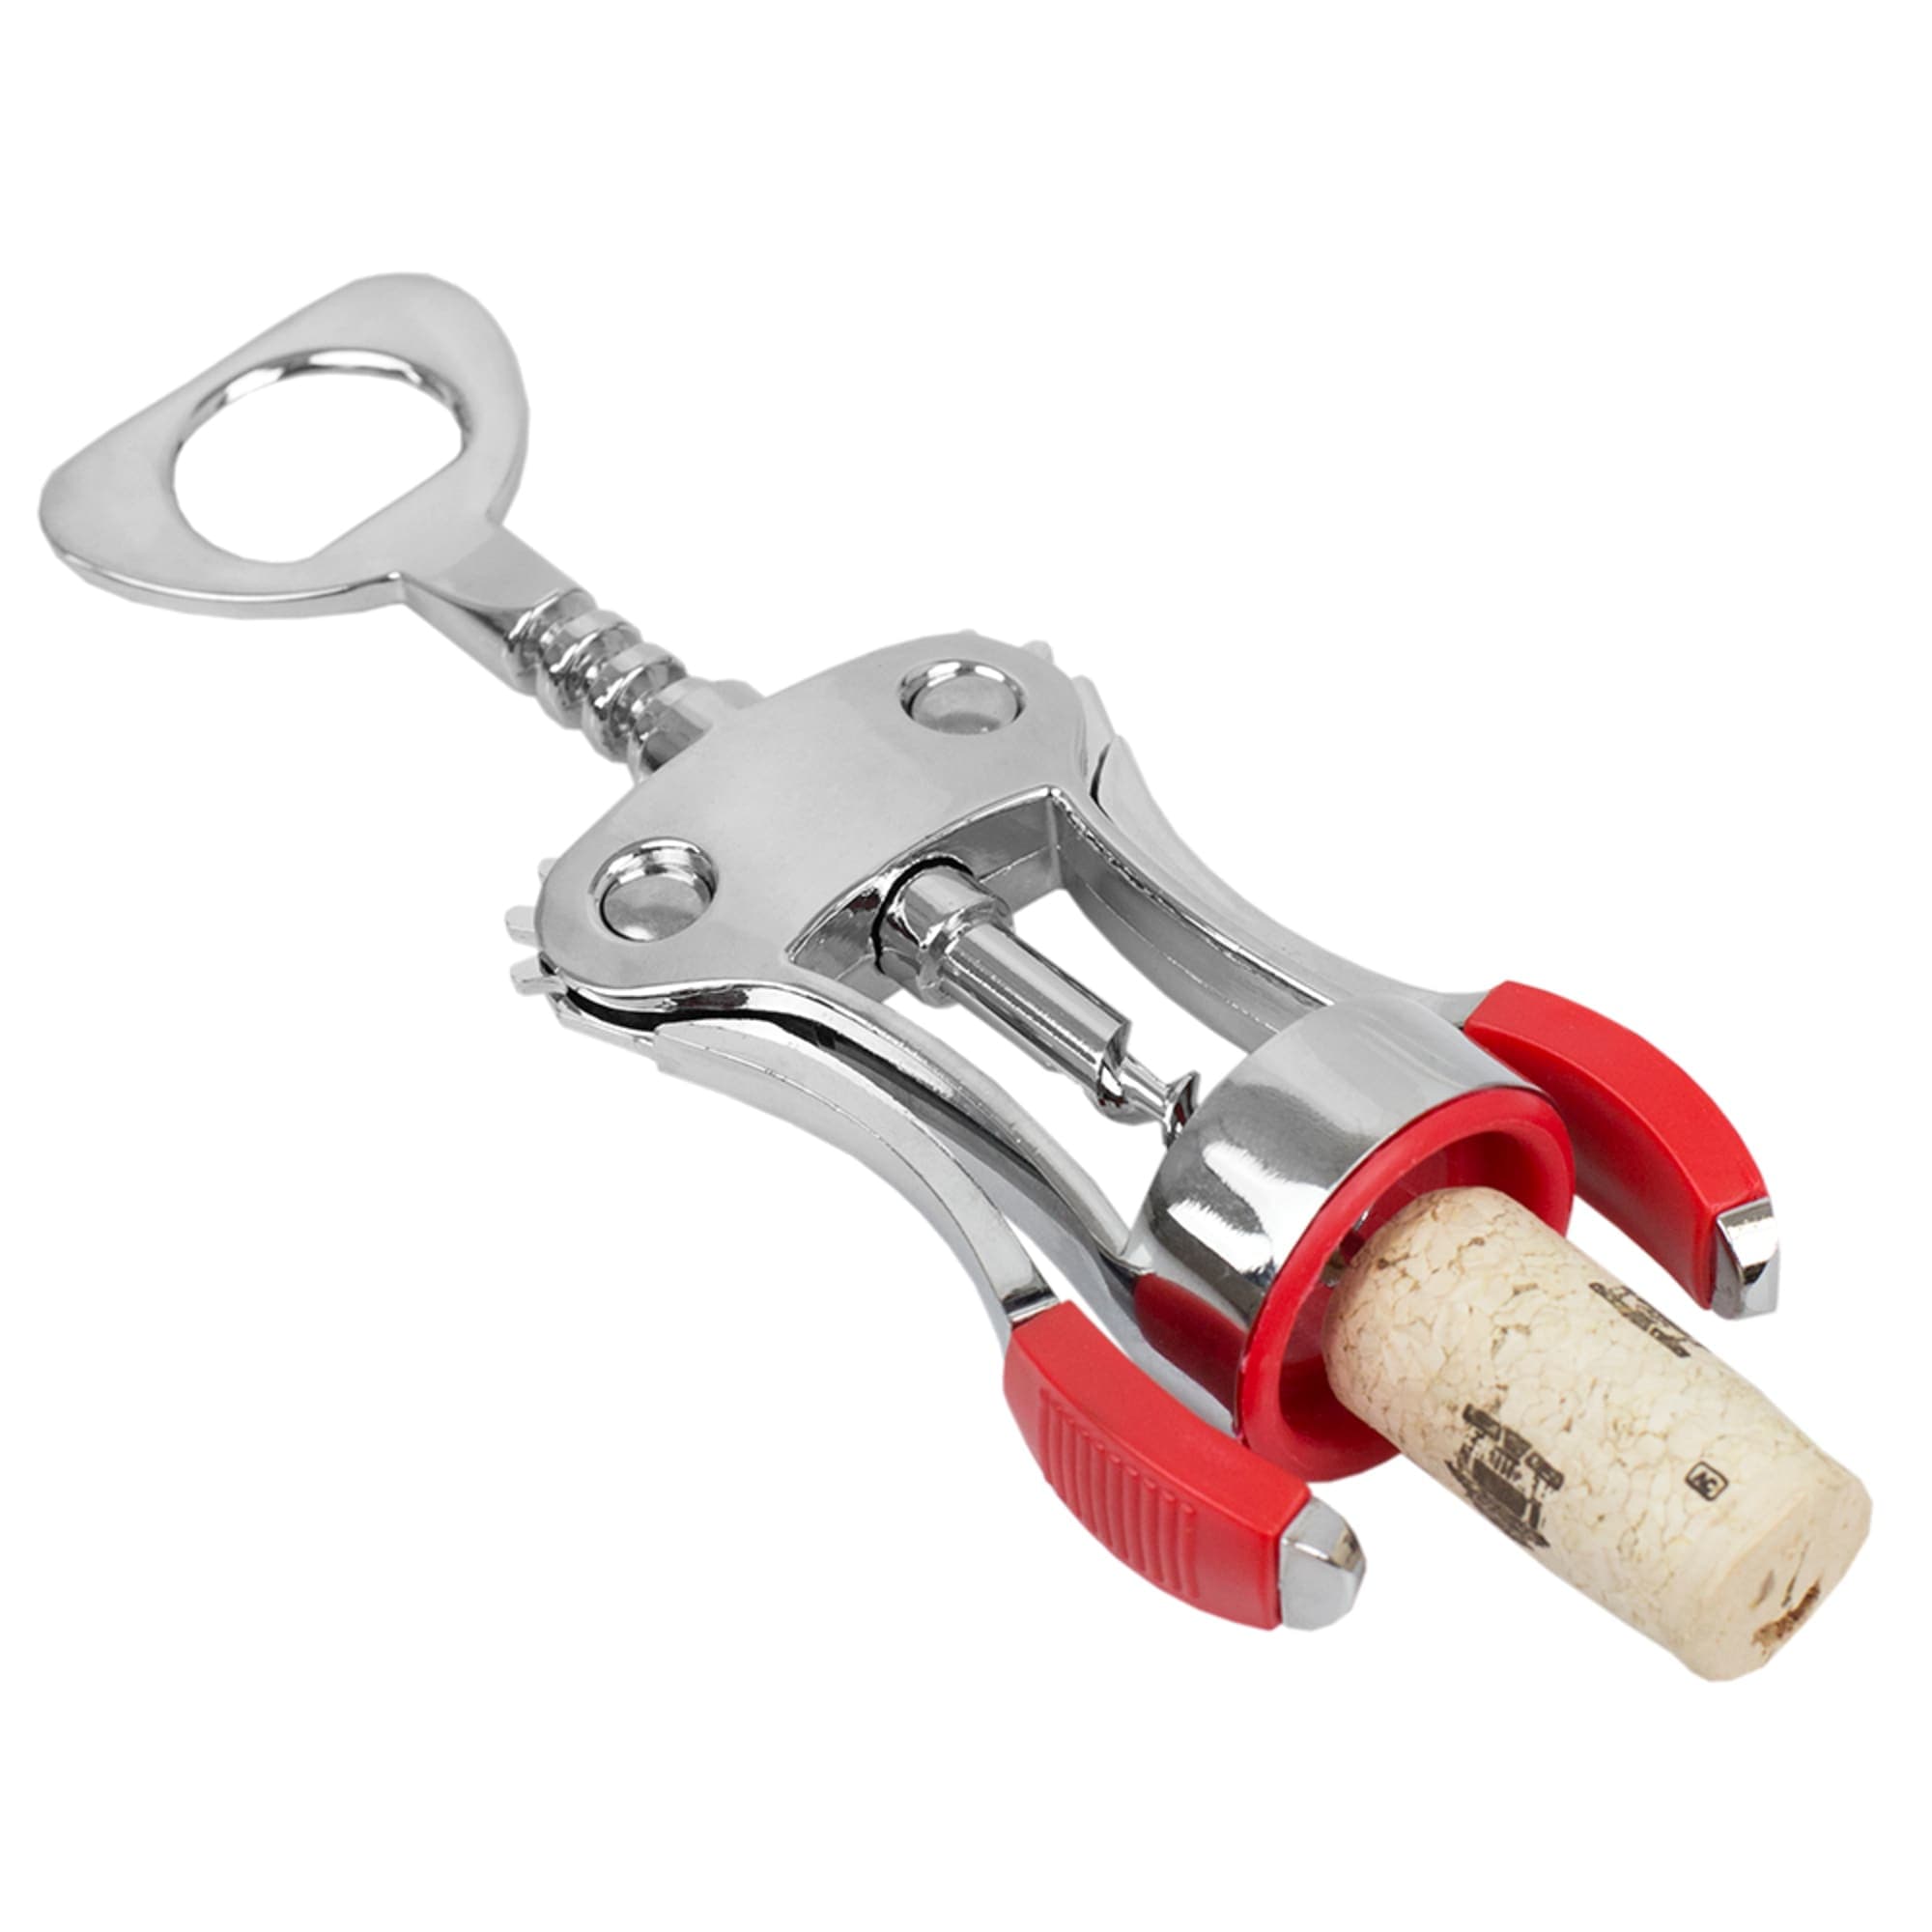 Home Basics Winged  Zinc Plated Steel Cork Screw Wine Opener with Rubberized Grips, Red $5.00 EACH, CASE PACK OF 24